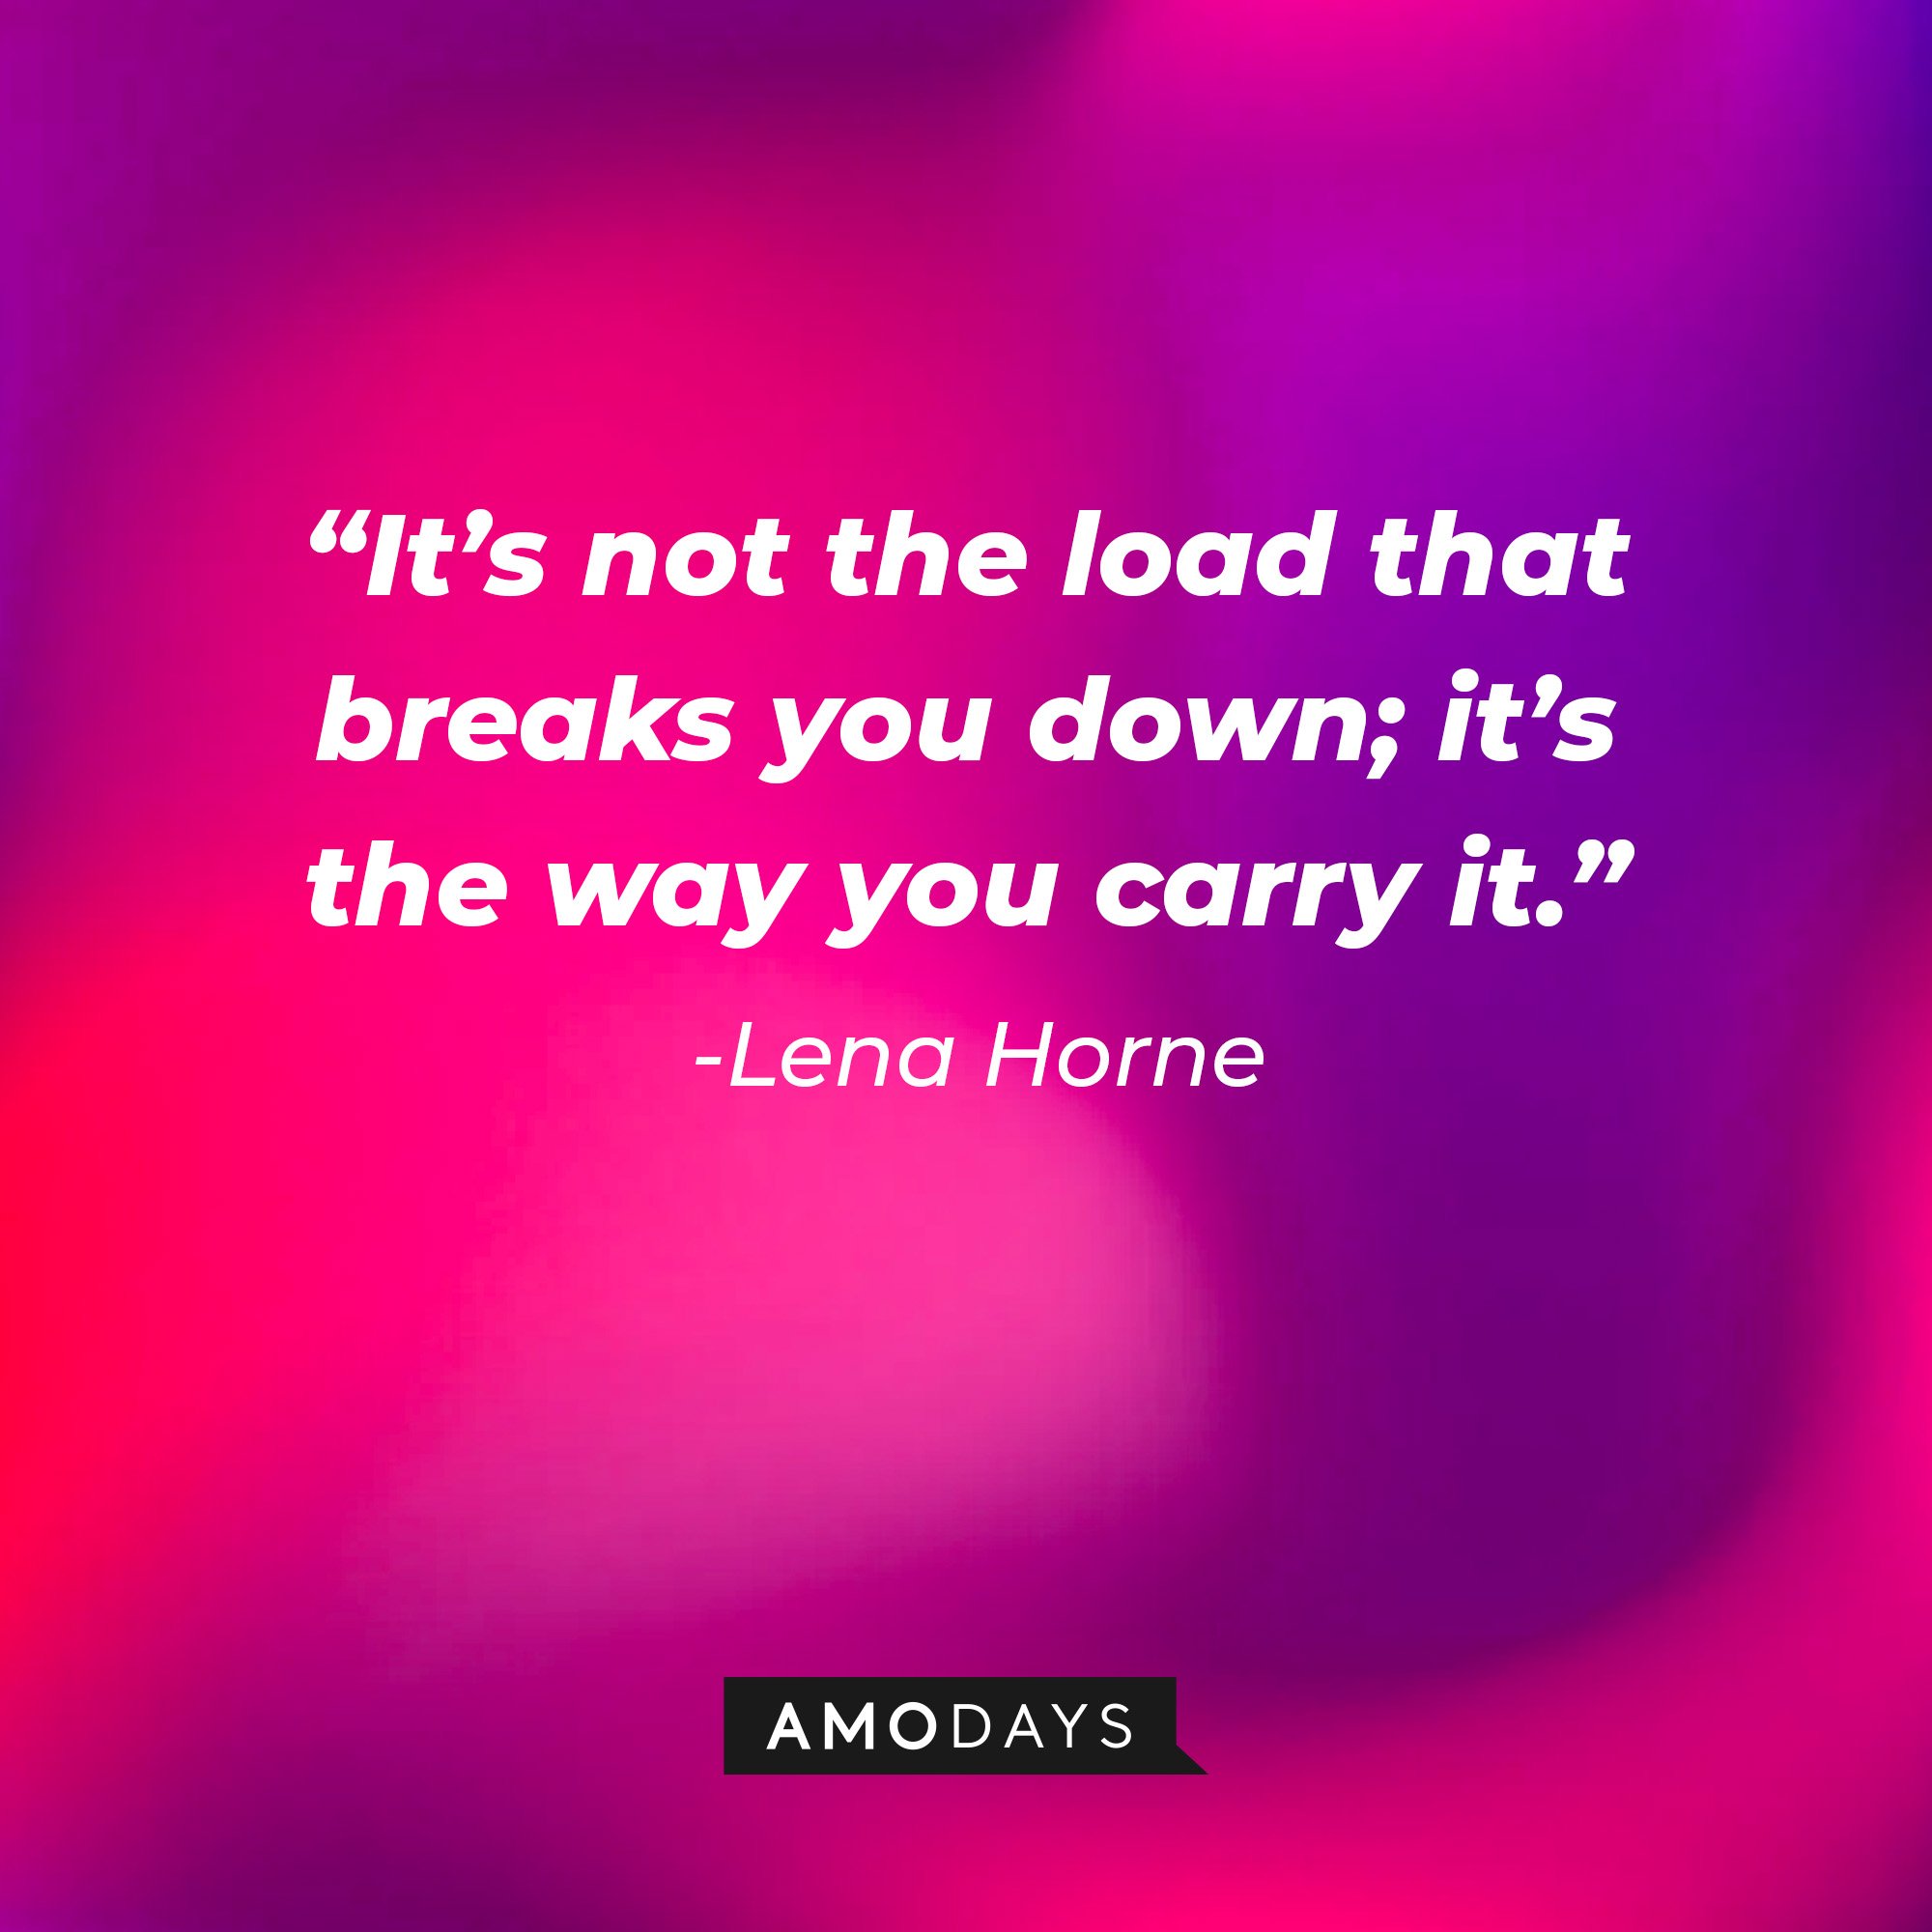  Lena Horne's quote: “It’s not the load that breaks you down; it’s the way you carry it.” | Image: AmoDays